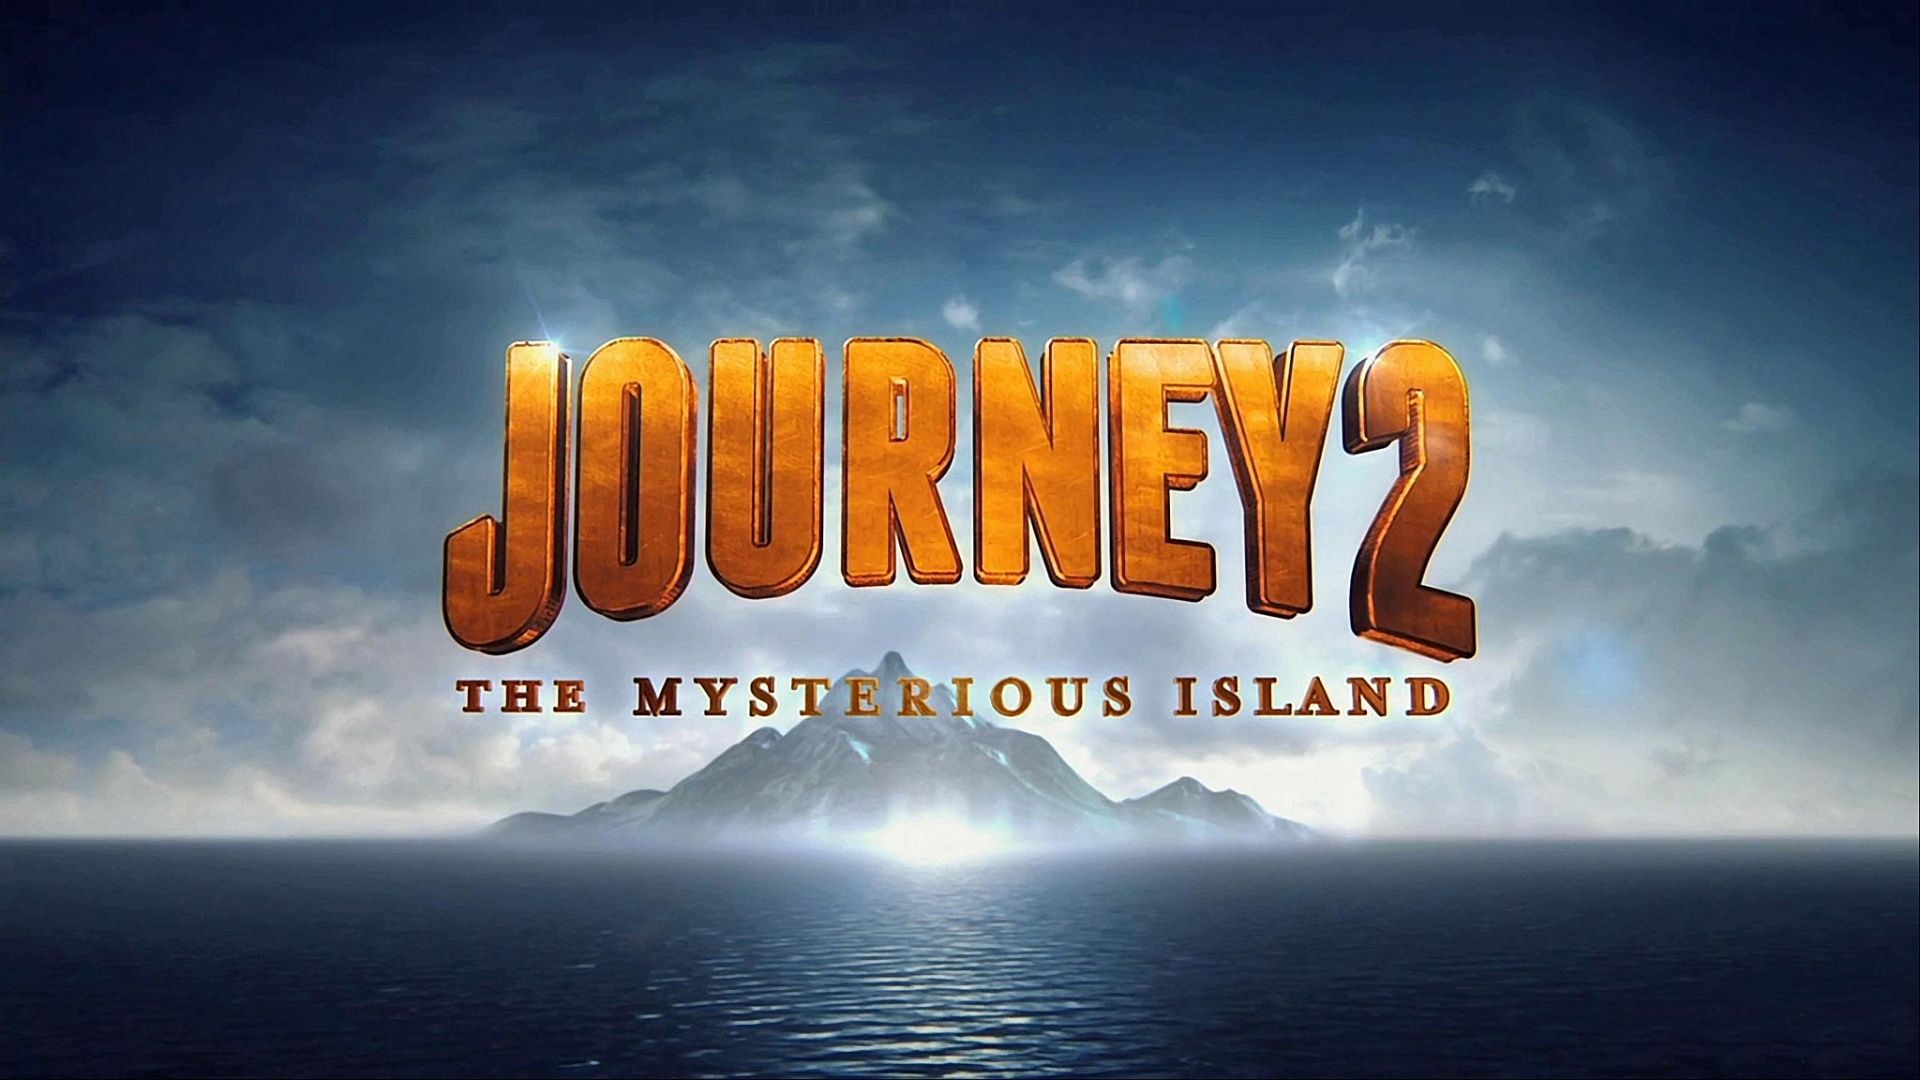 Journey 2: The Mysterious Island Wallpaper, Picture, Image